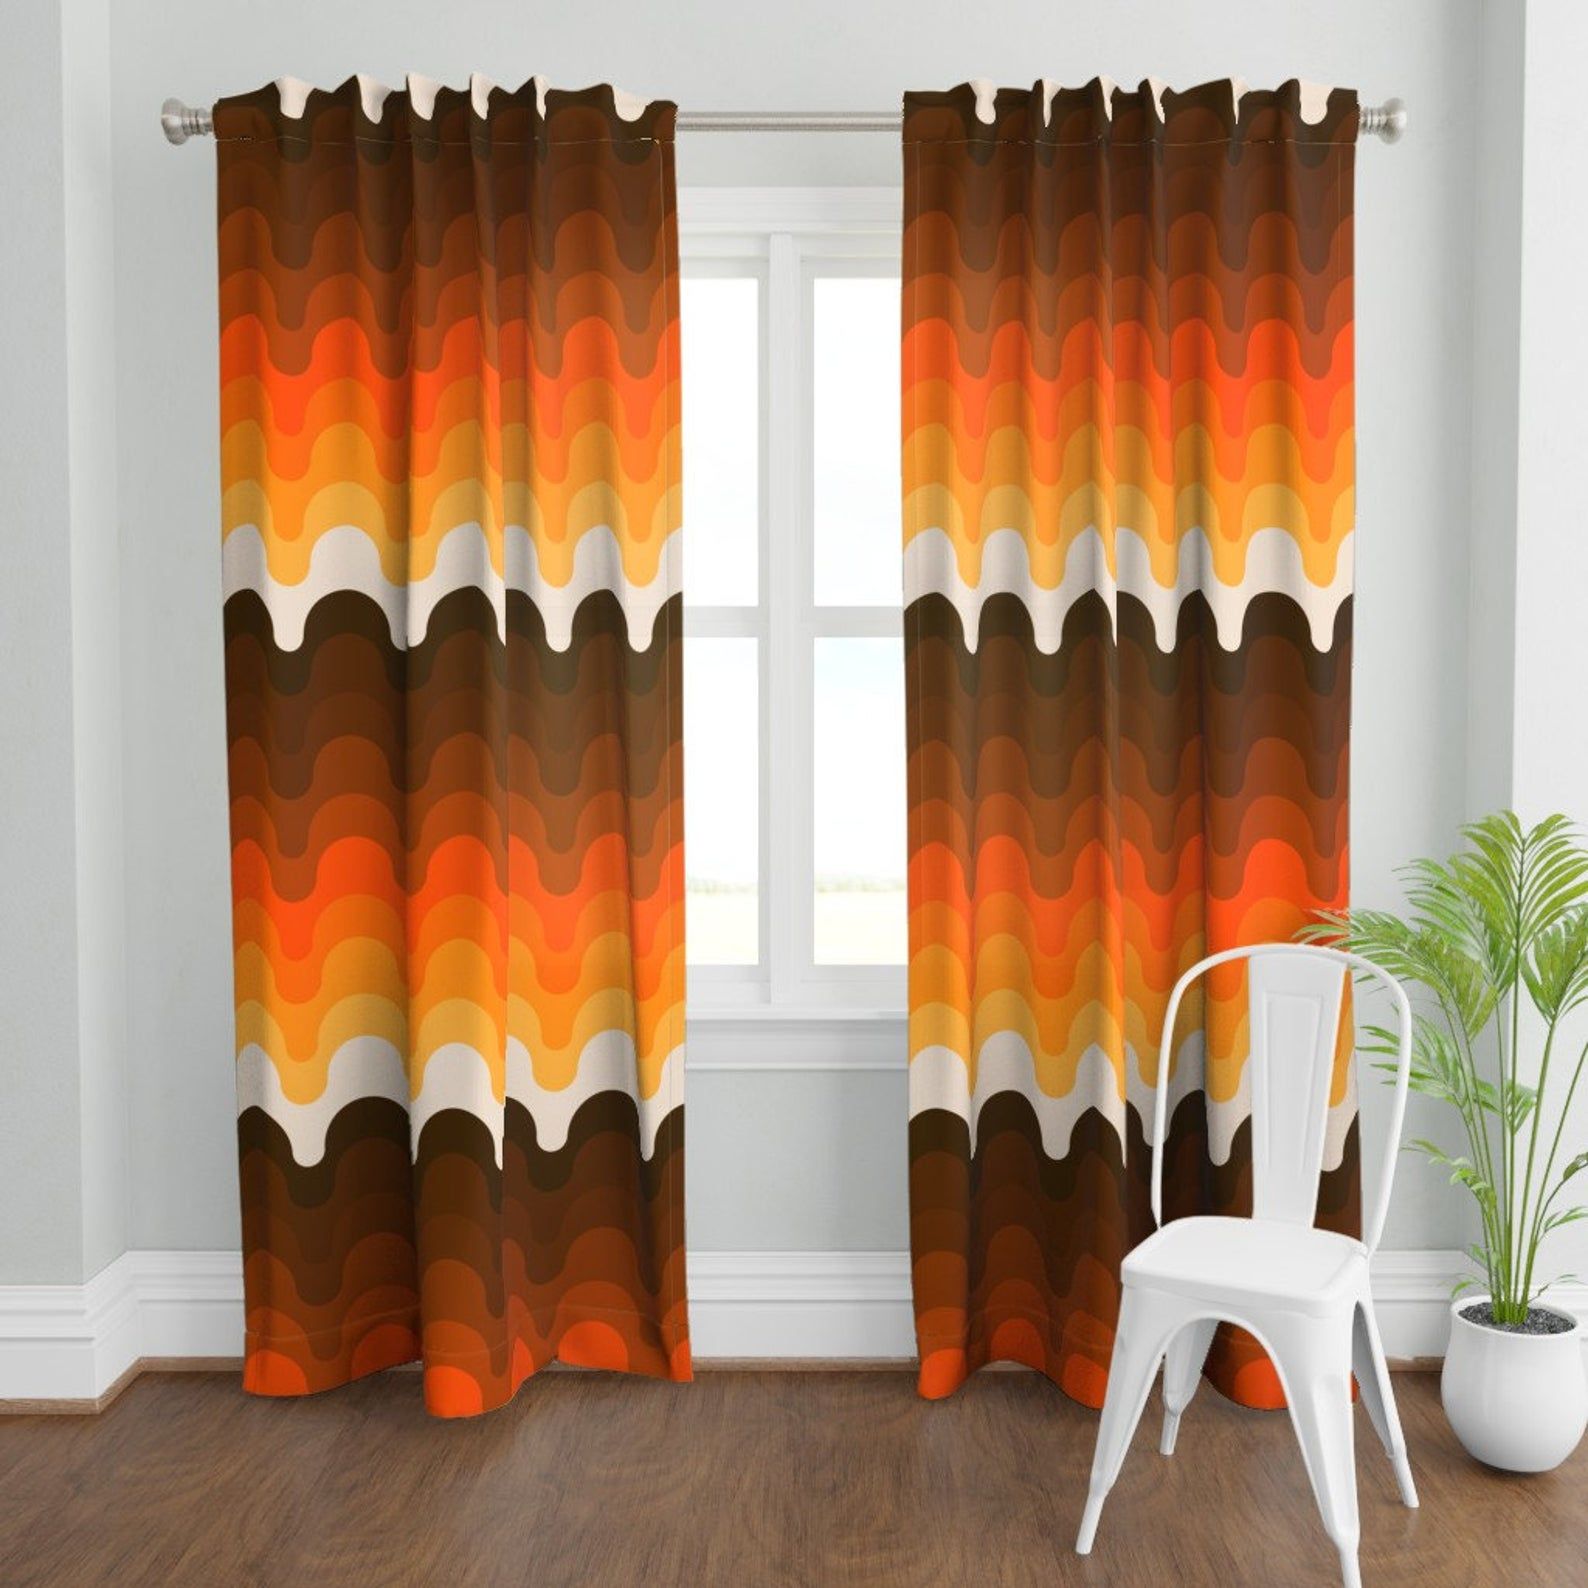 The Return Of Retro: Vintage Curtain Styles Making A Comeback